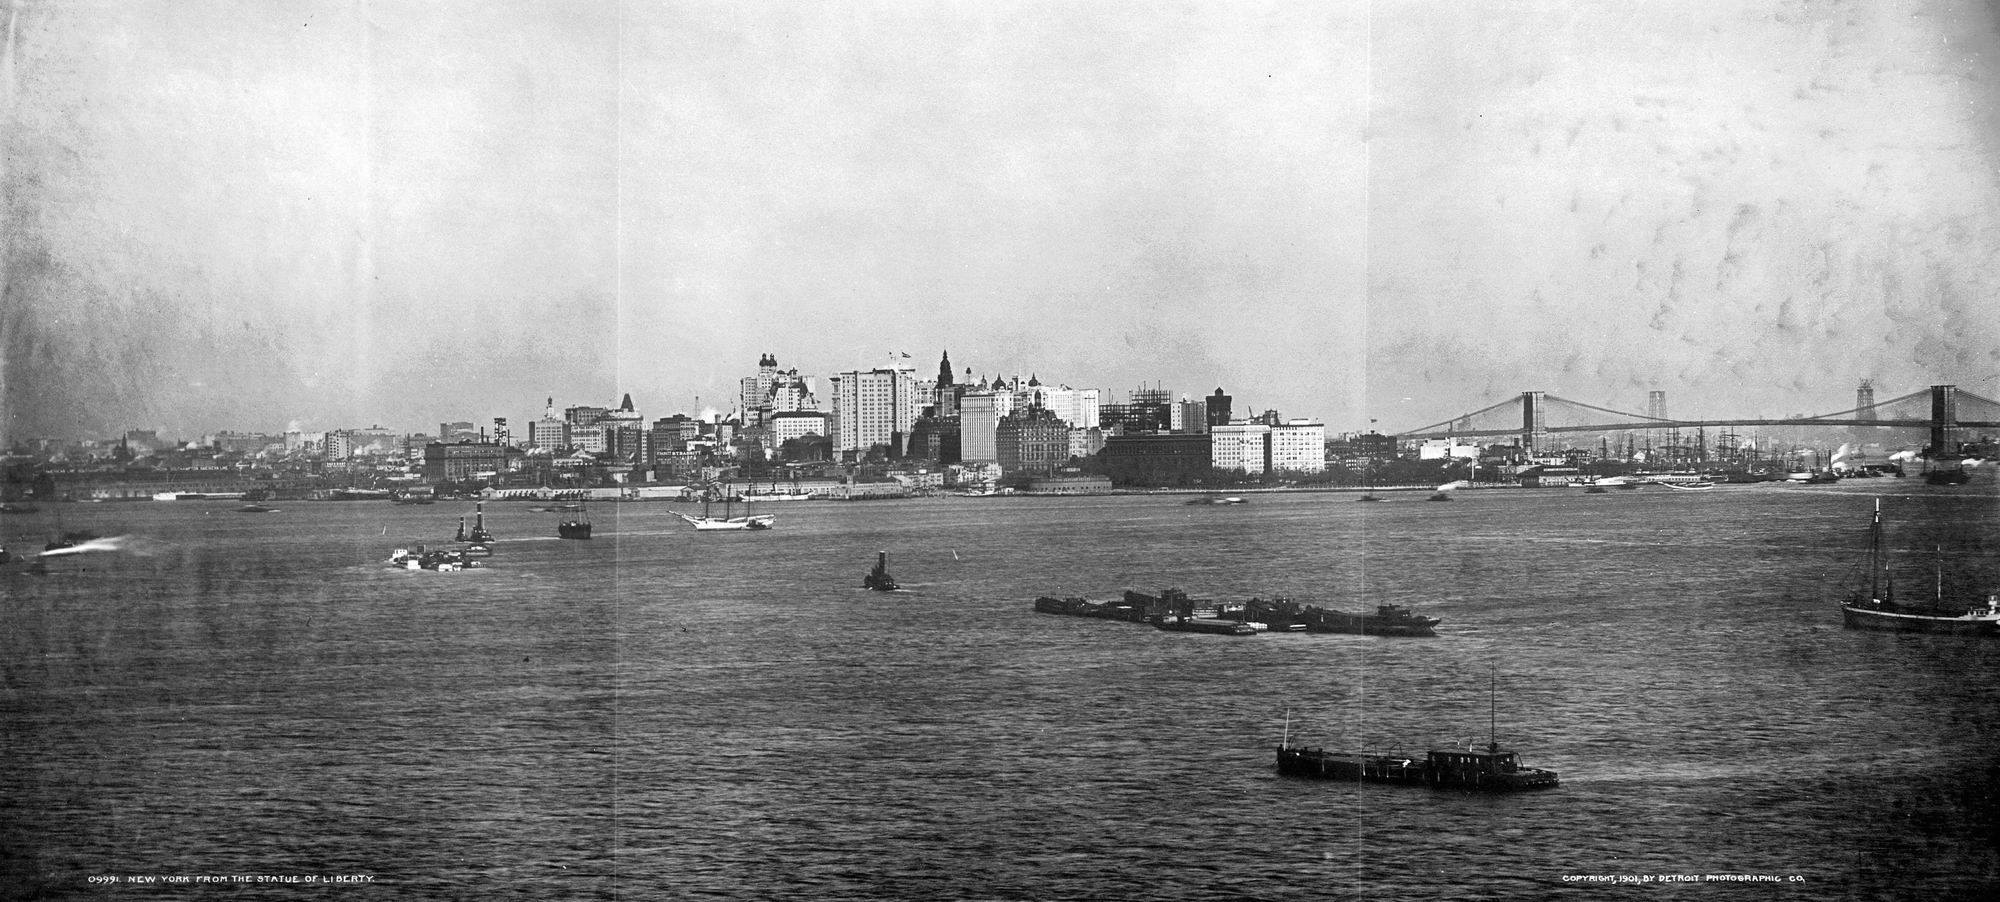 New York City as seen from the Statue of Liberty circa 1901.jpg